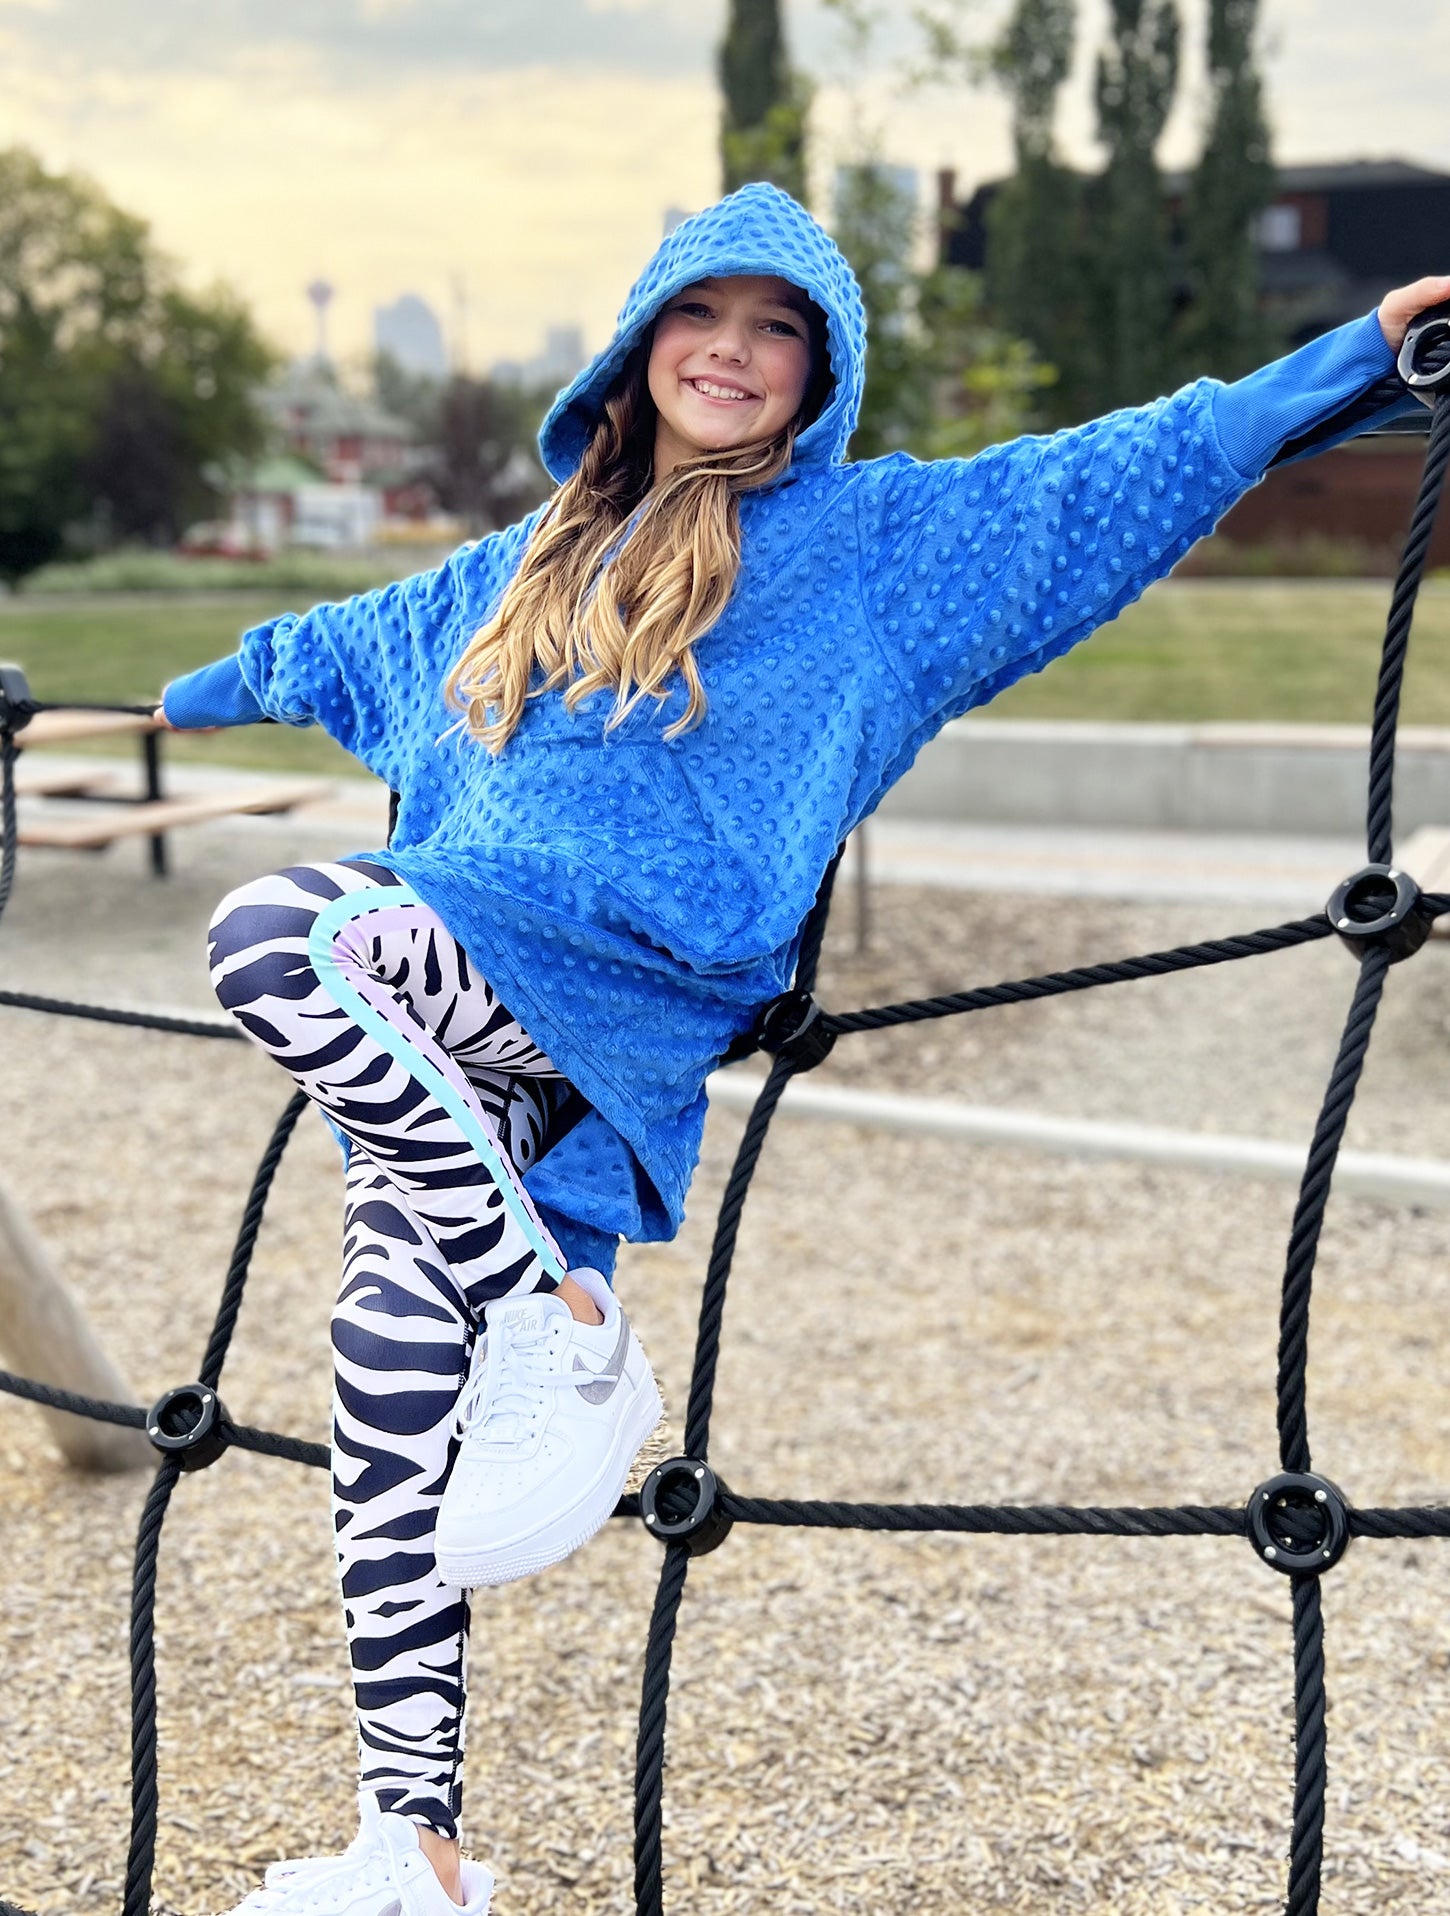 Oversized hoodie + Active Leggings | Cuddly Pack | Limeapple